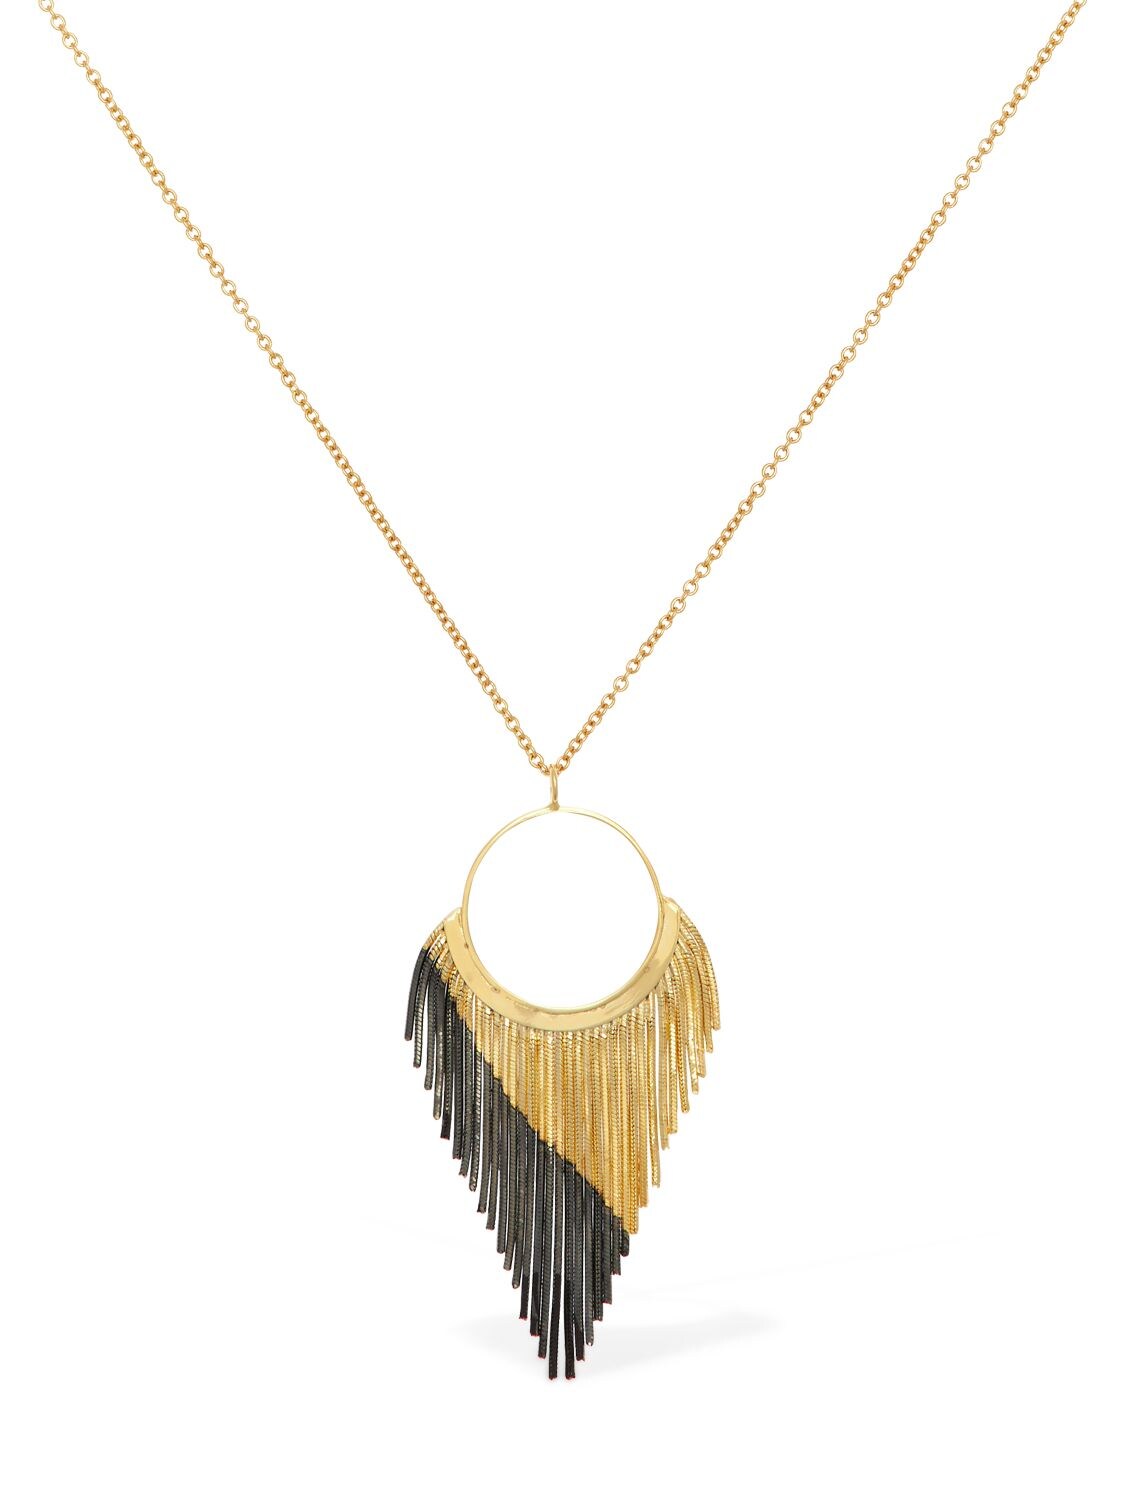 Long Necklace W/ Fringed Hoop Pendant